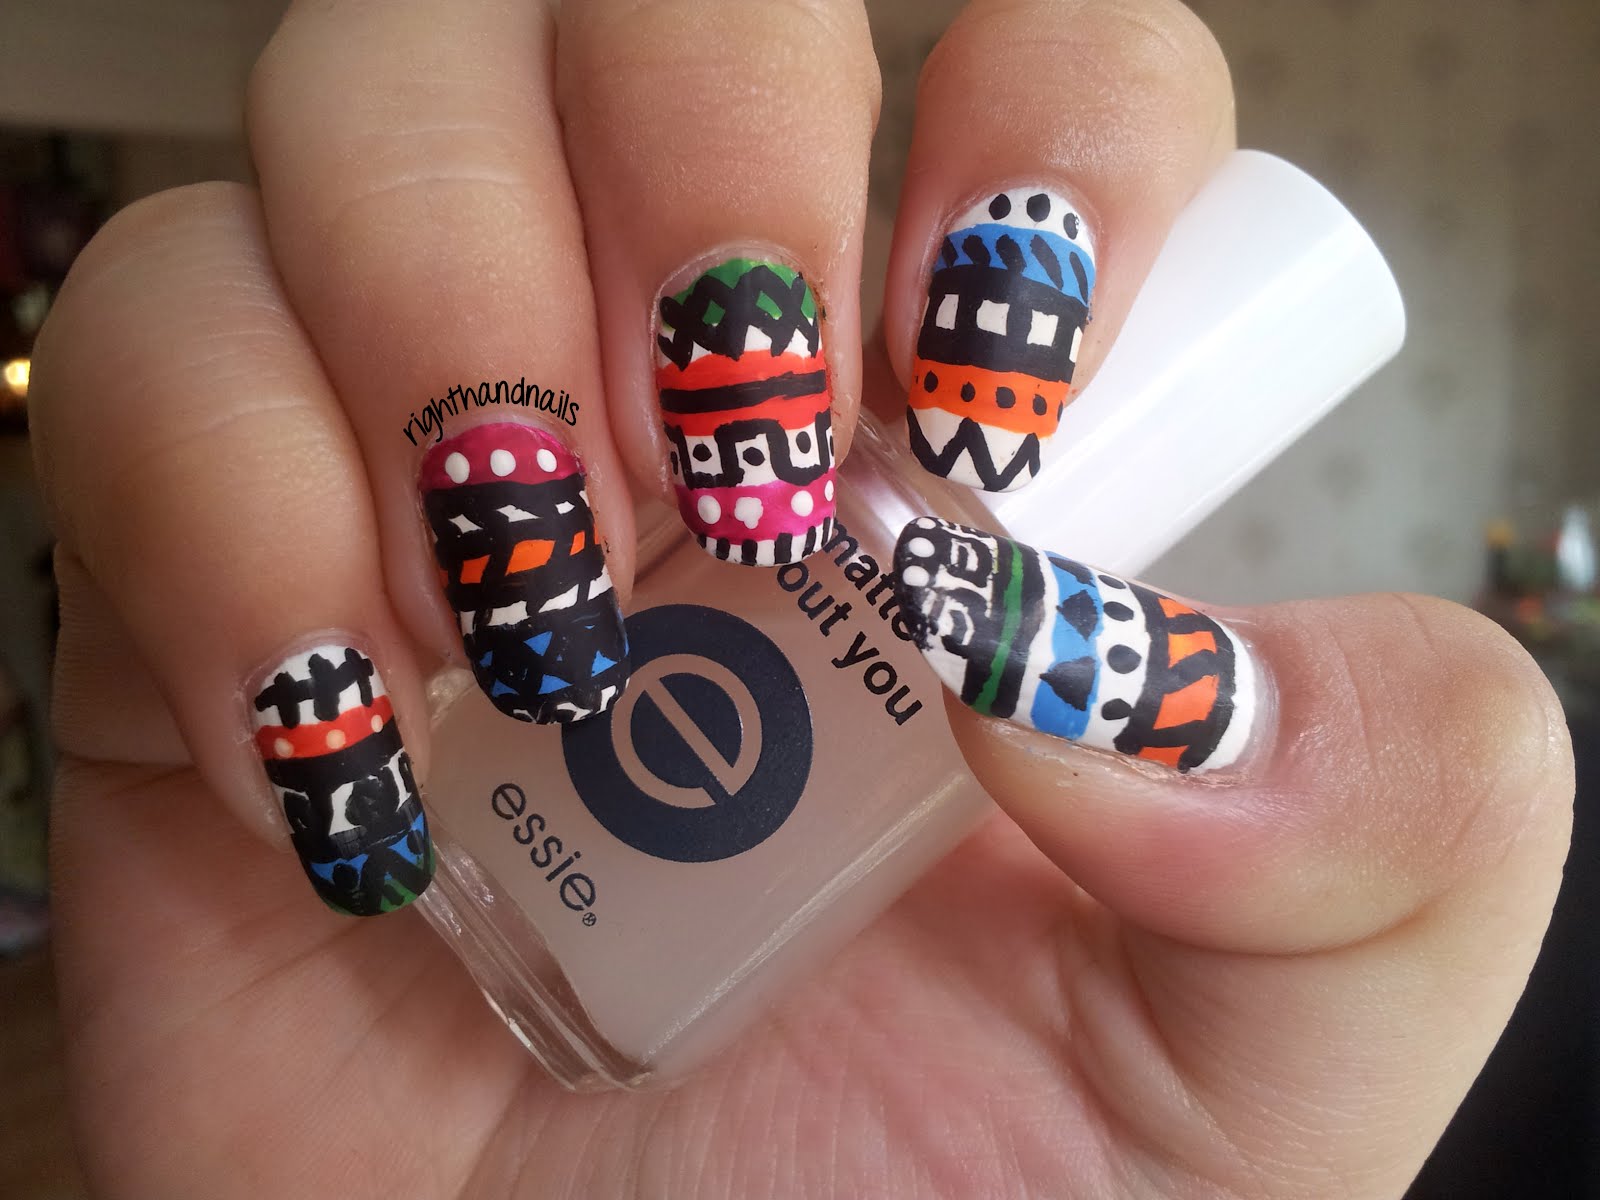 2. Tribal Nail Art Ideas for Beginners - wide 6